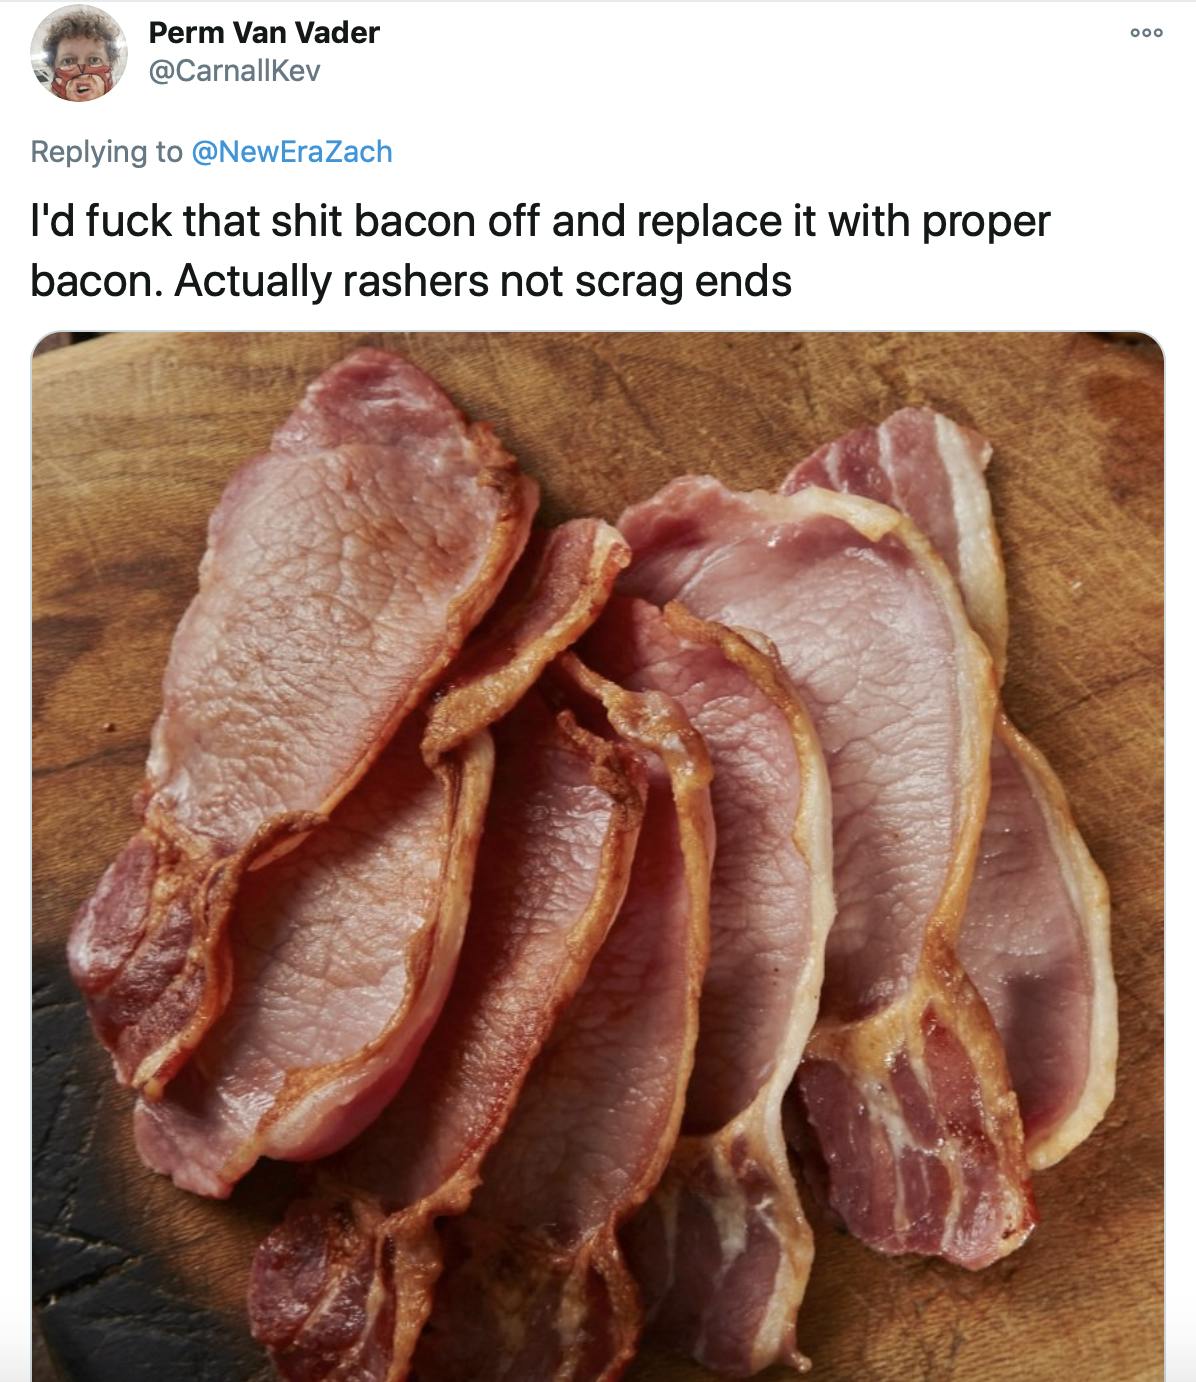 'I'd fuck that shit bacon off and replace it with proper bacon. Actually rashers not scrag ends' picture of British bacon rashers